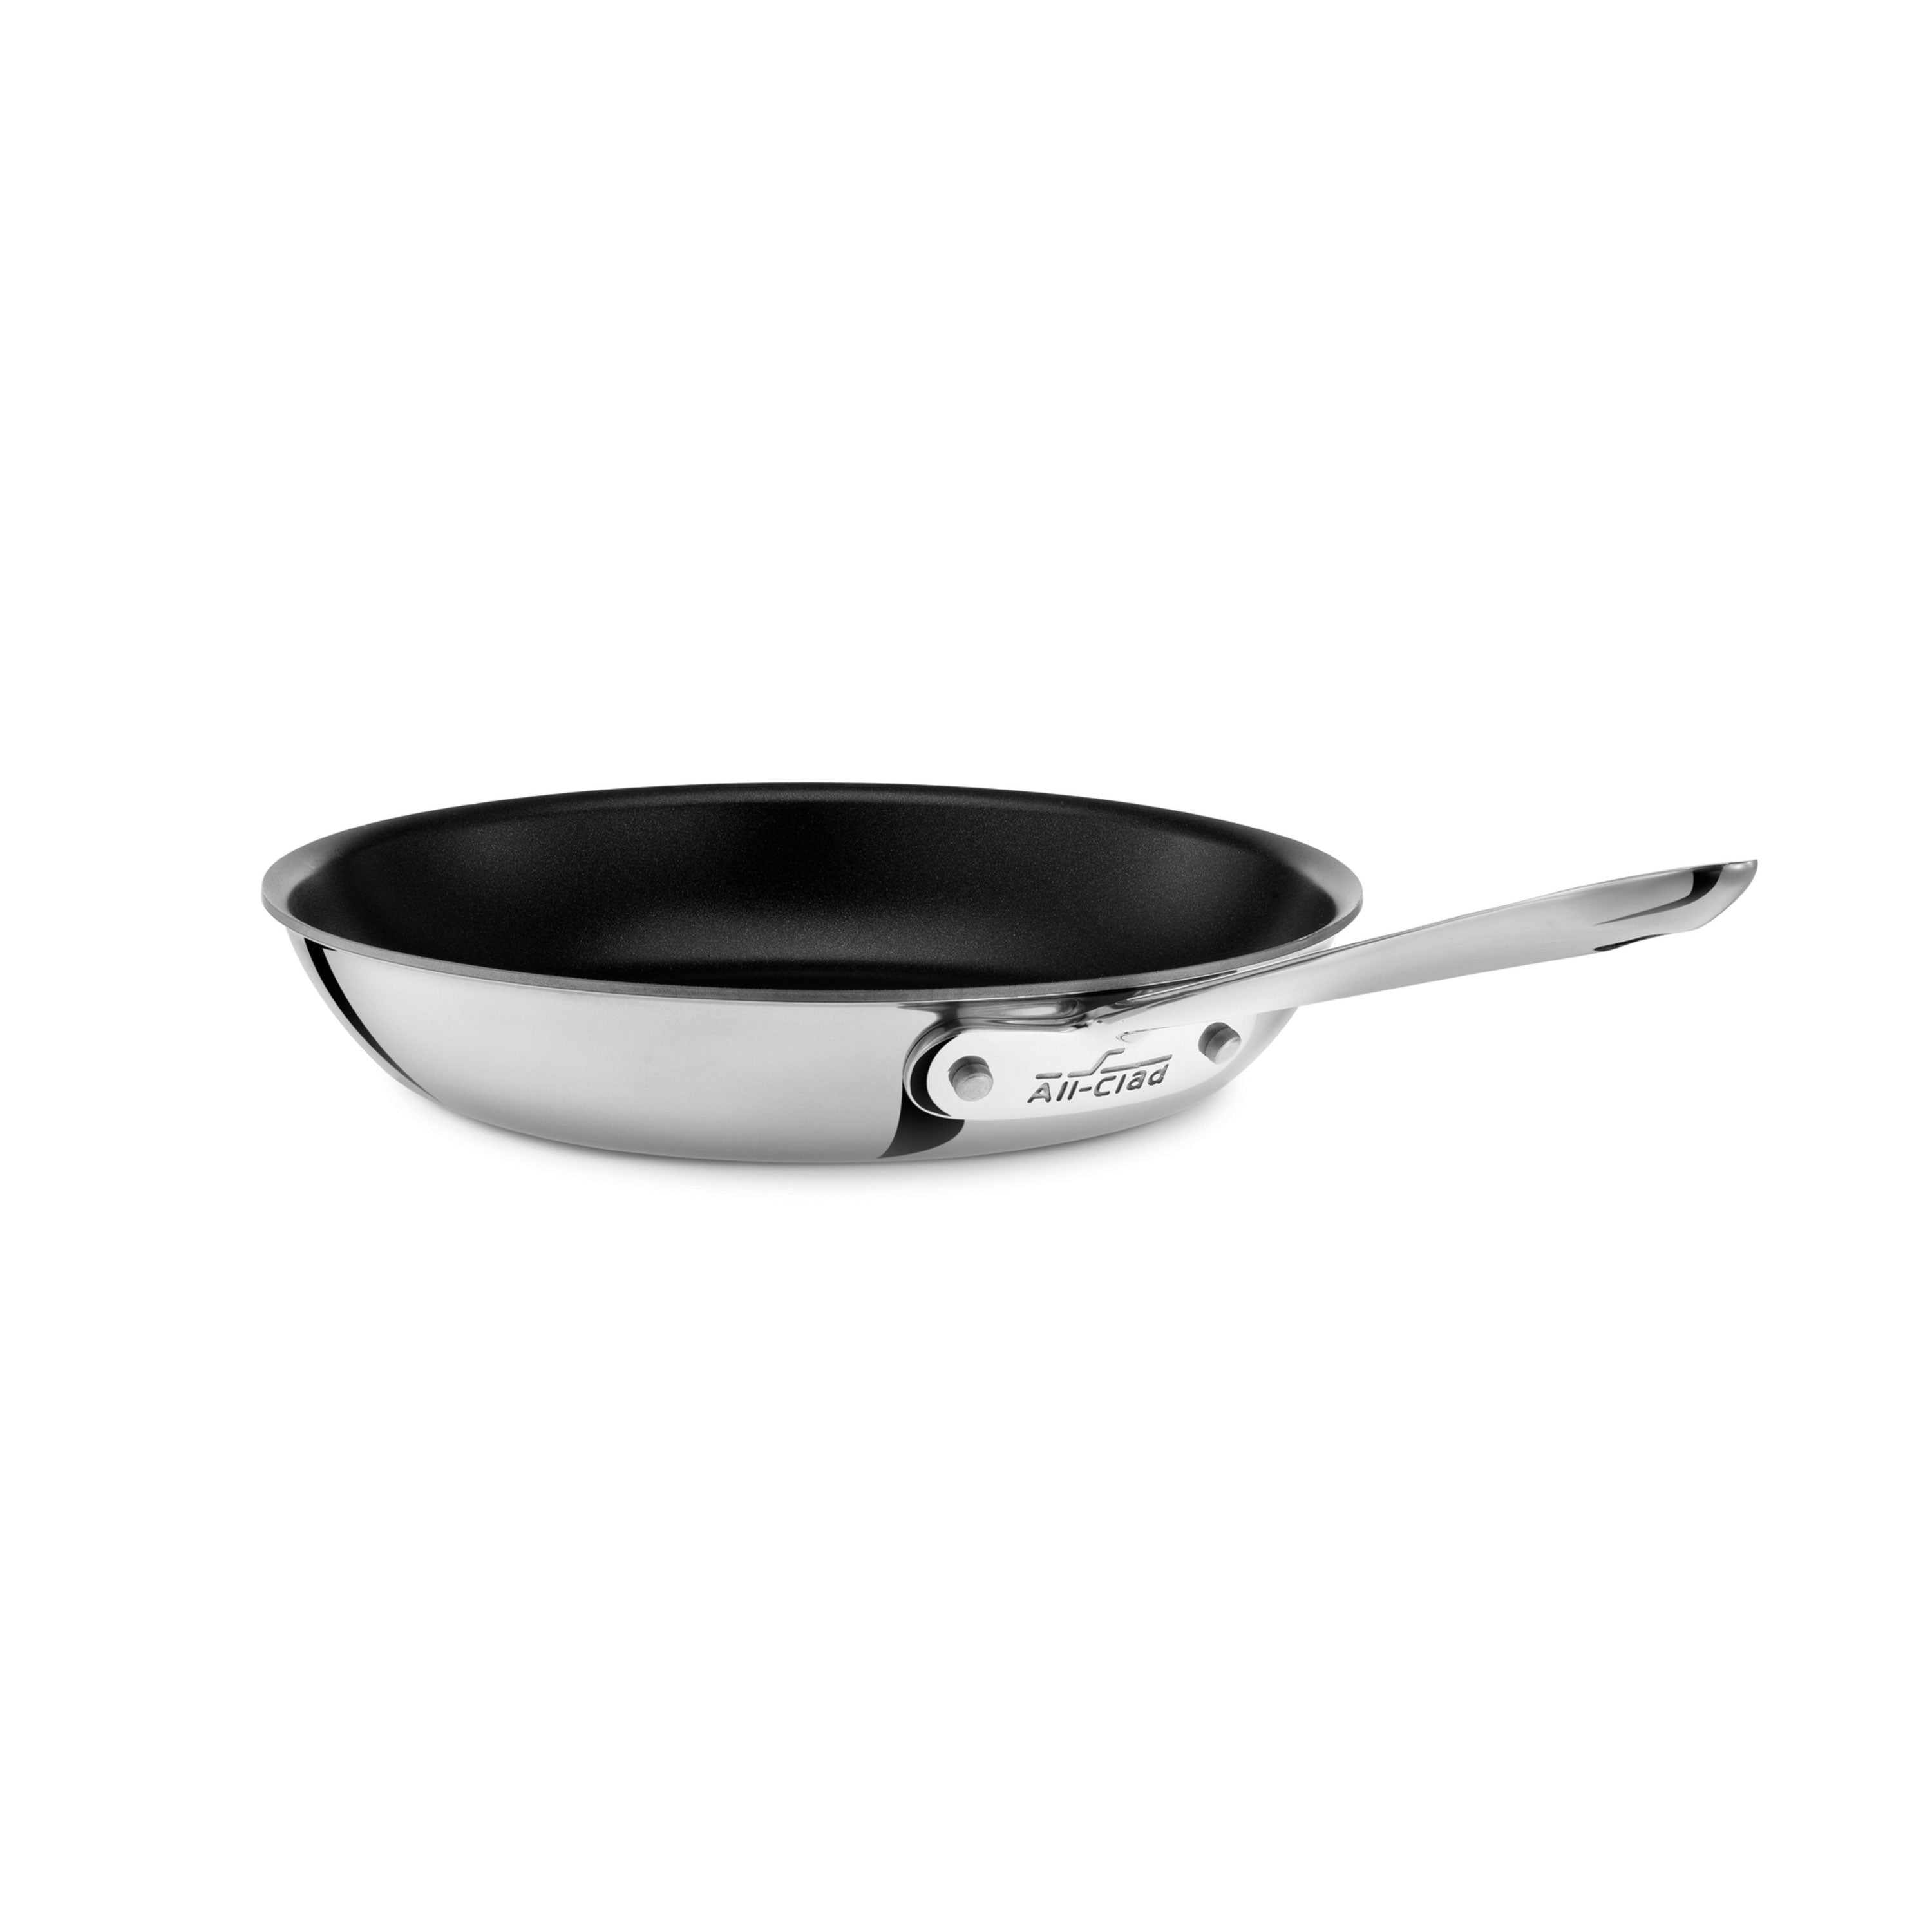 All-Clad D3 Stainless Steel French Skillet, 7.5